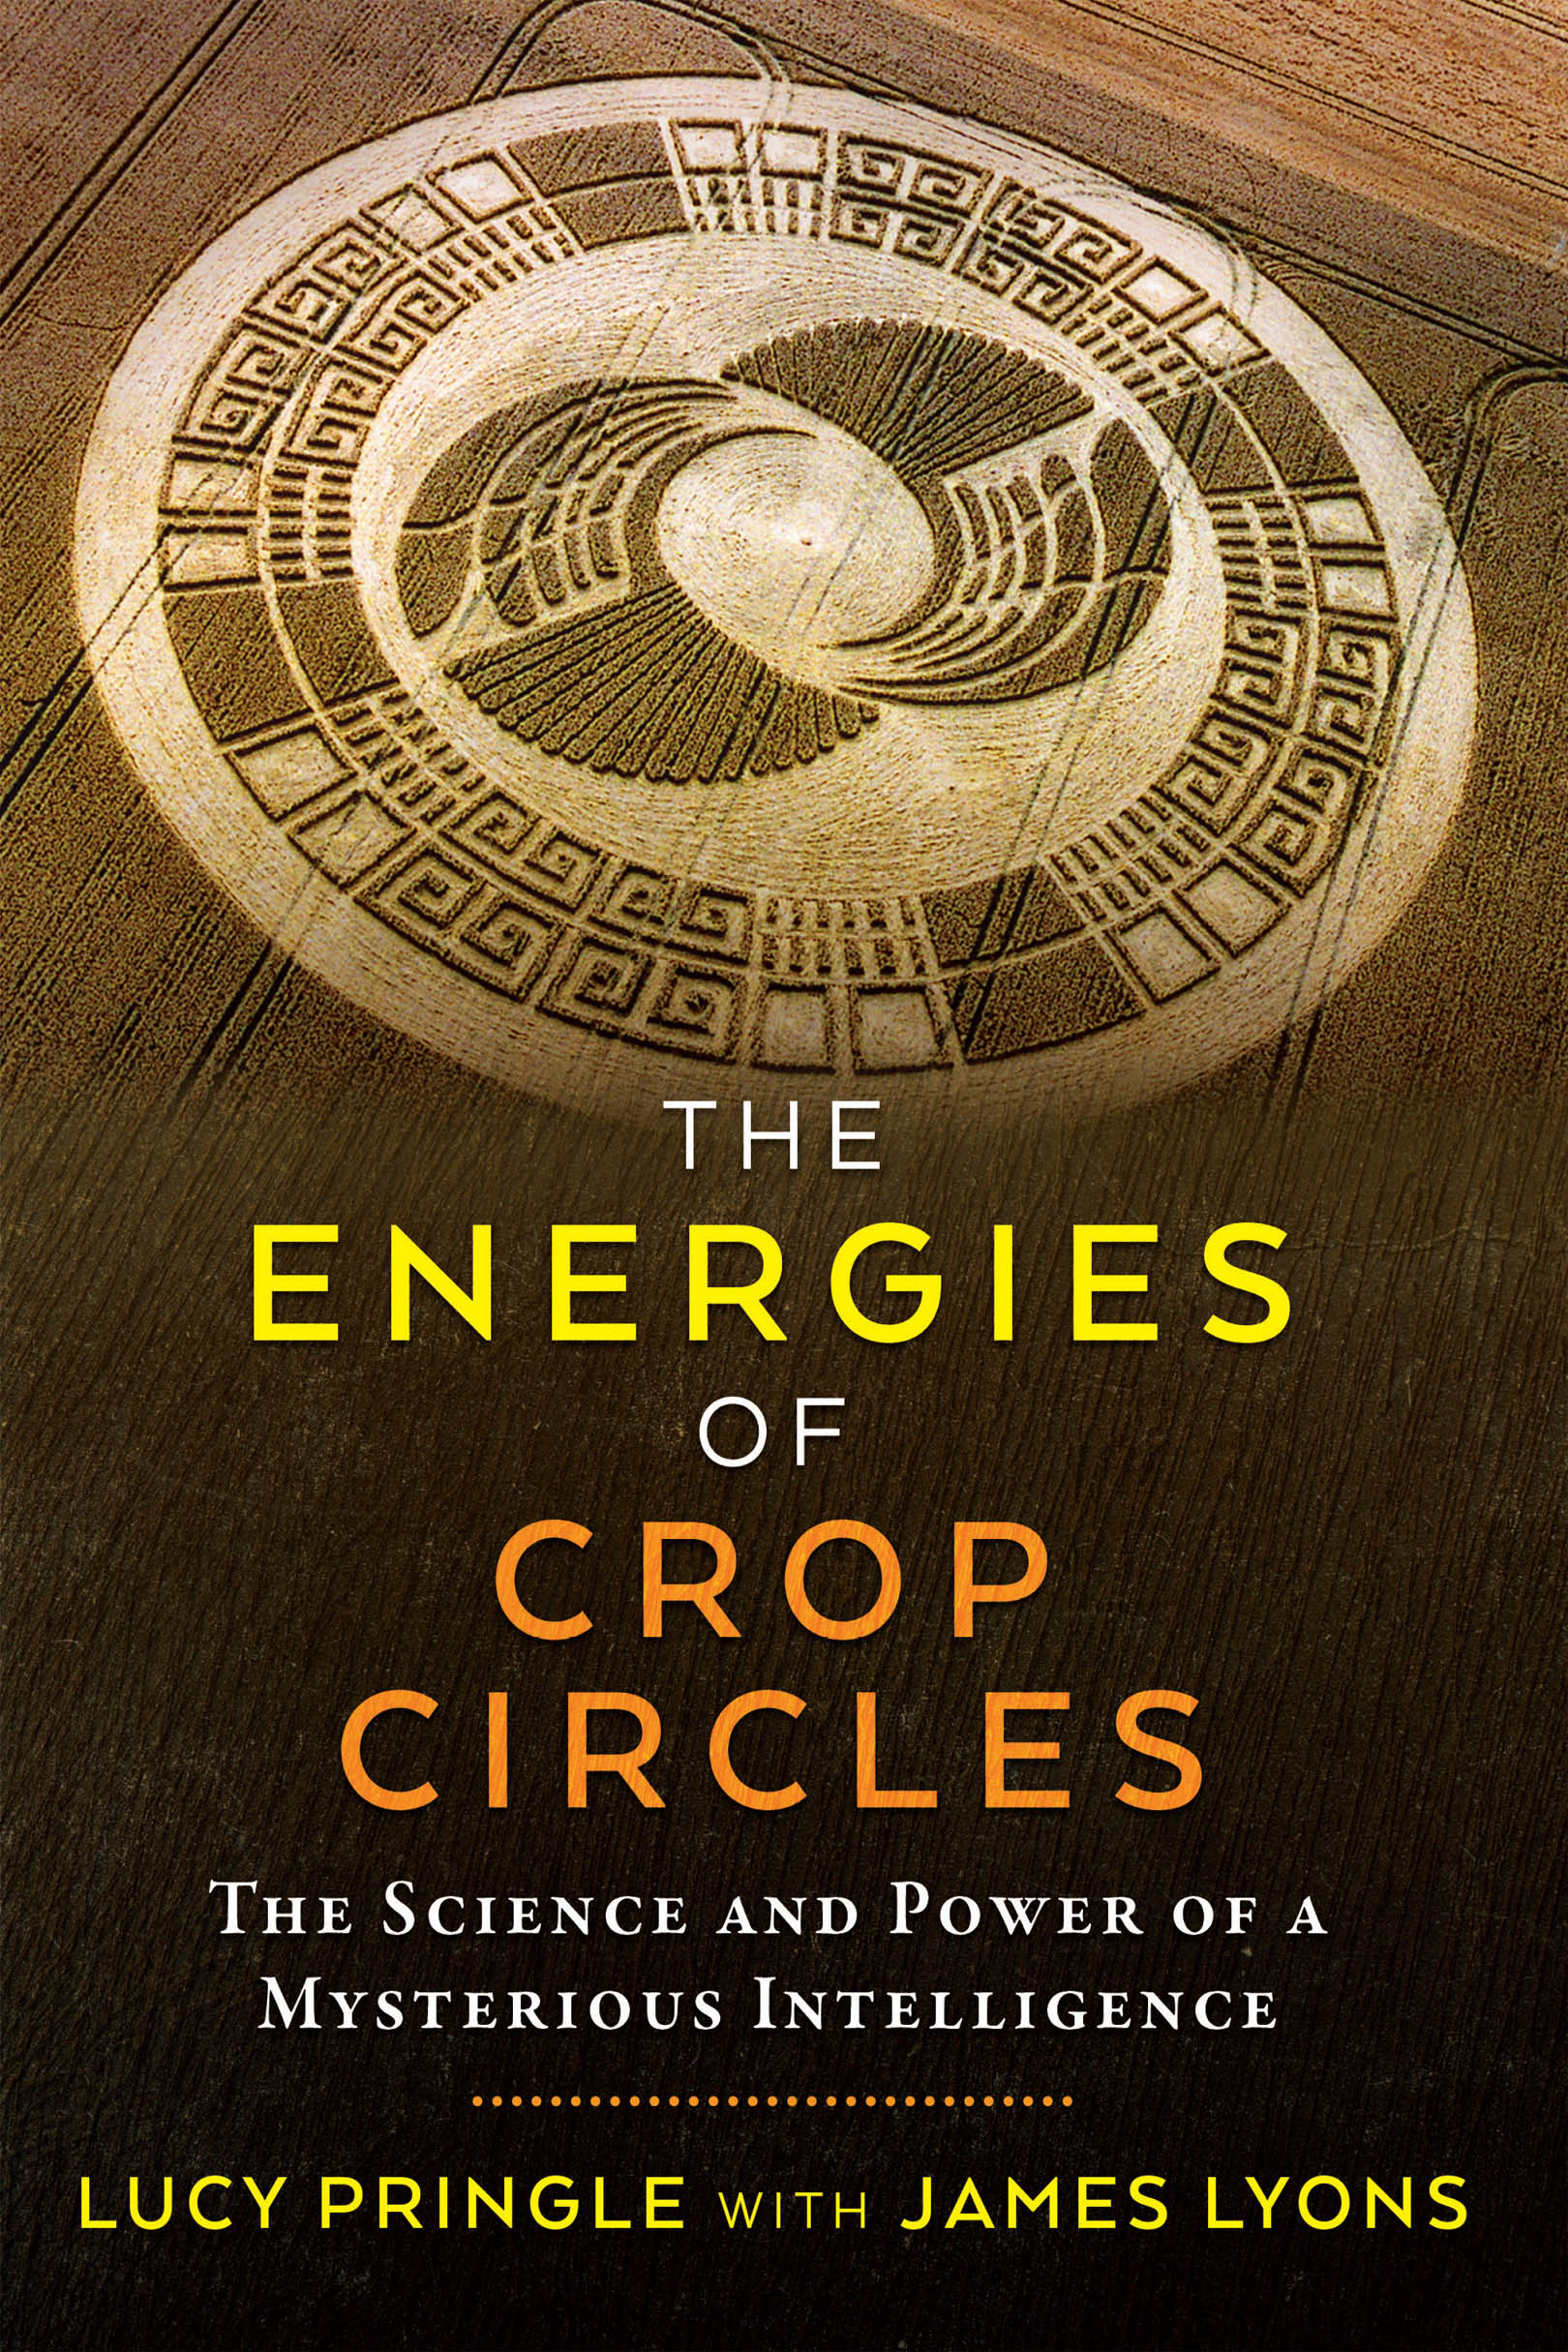 THE ENERGIES OF CROP CIRCLES To fly with Lucy Pringle over a crop circle - photo 1